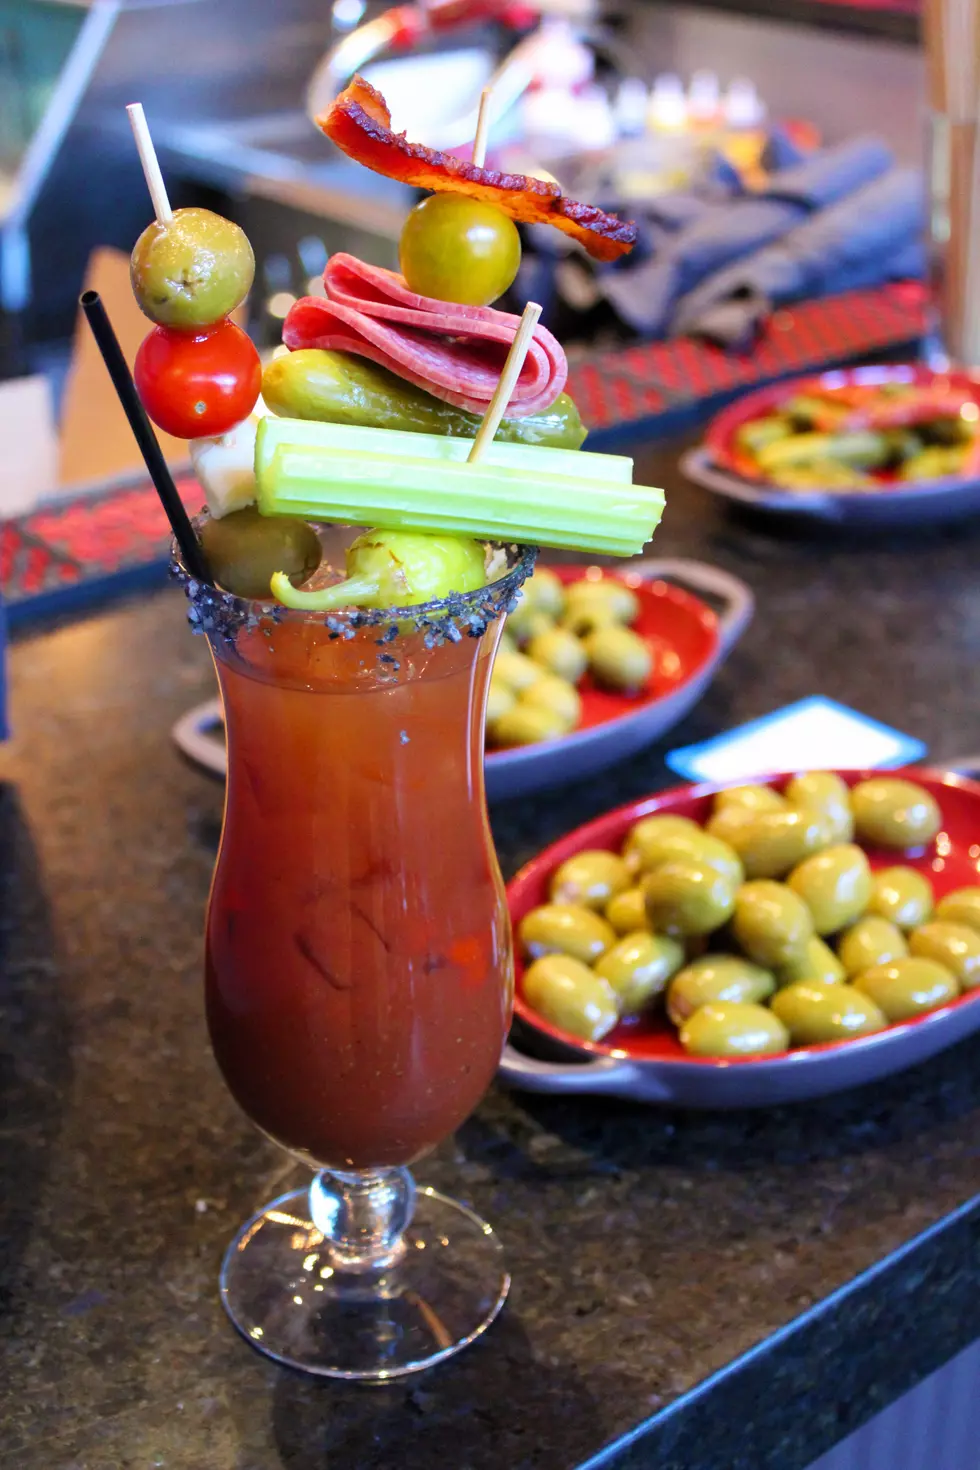 Bloody Mary Festival Coming This Spring to The Twin Cities